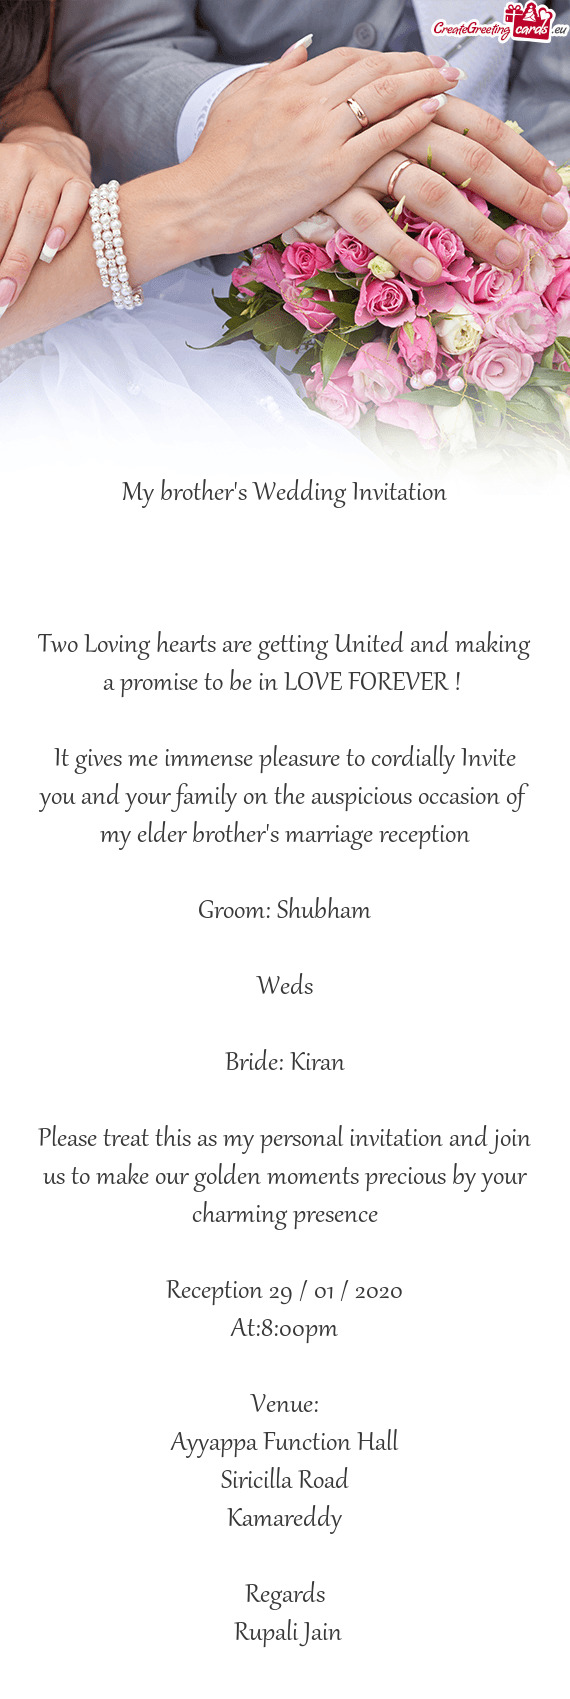 My brother s Wedding Invitation - Free cards